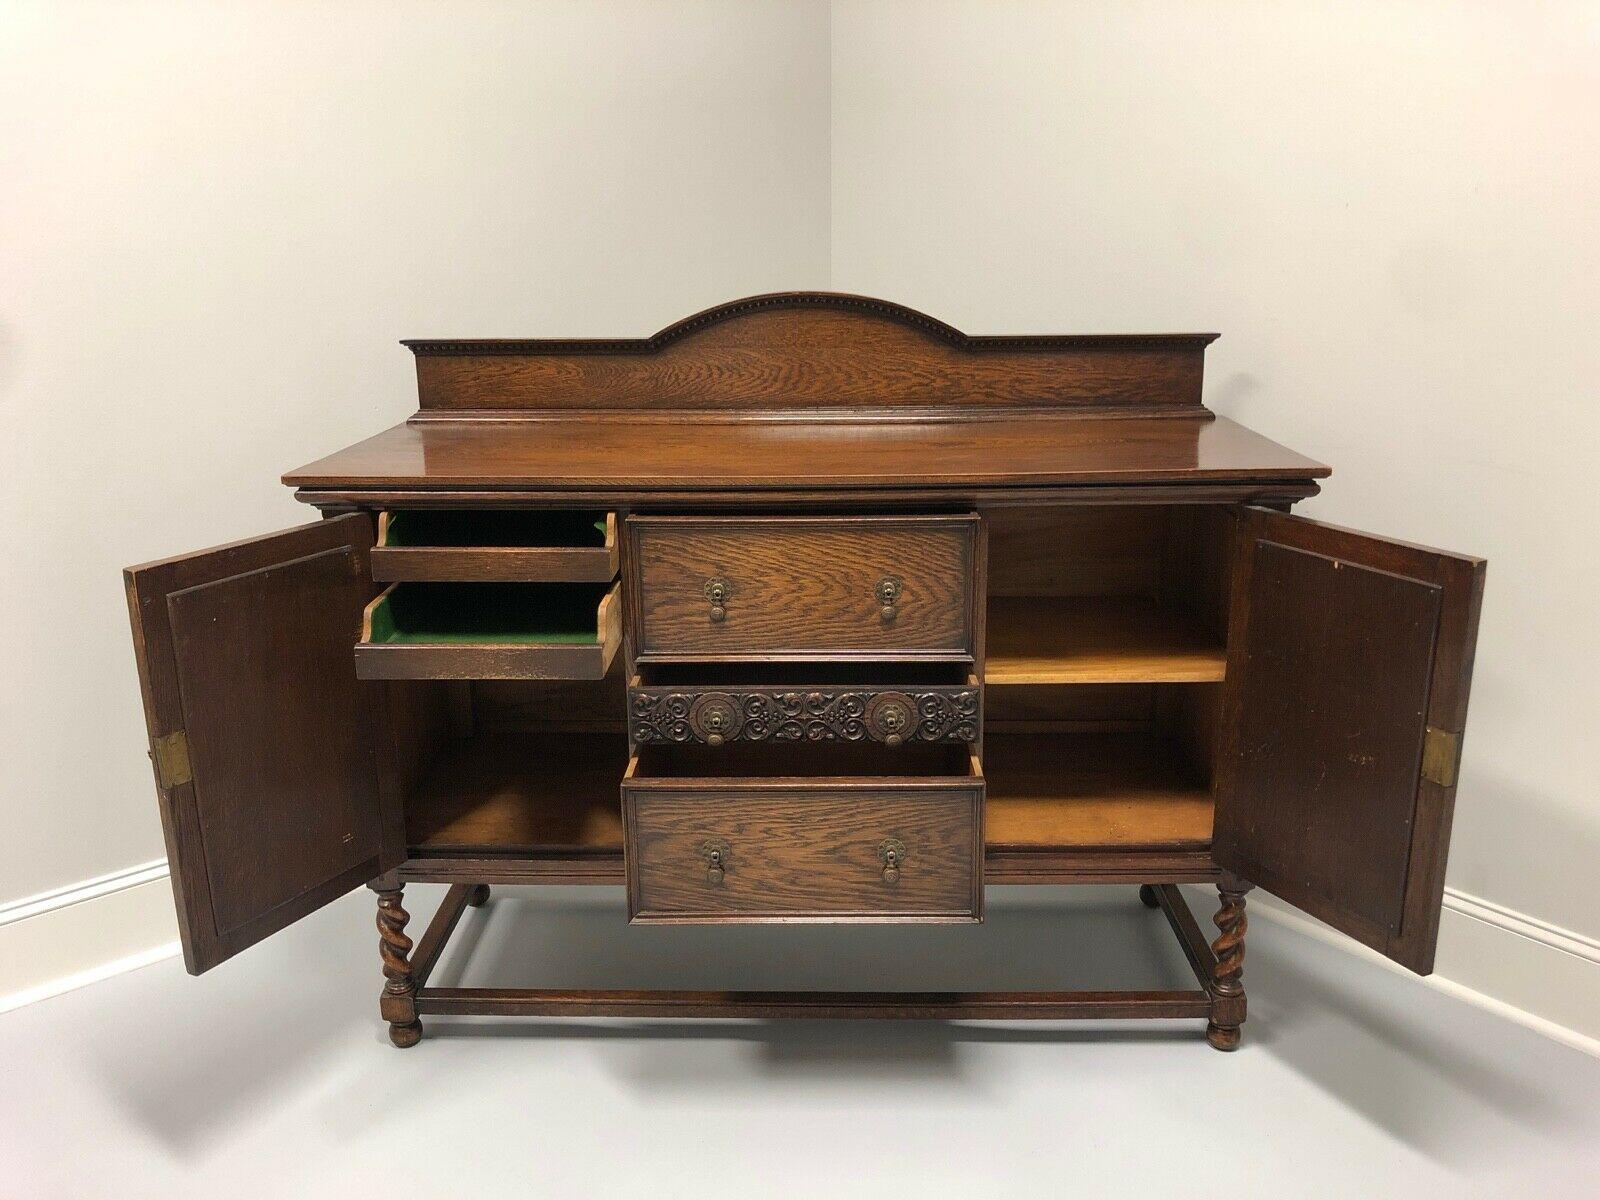 A sideboard in Jacobean style in solid Oak. Likely American in origin from the late 19th to early 20th Century. Carved details with barley twist legs. Three dovetail drawers flanked by two locking cabinets.

Measures: 60W 22.5D 39H, Backsplash